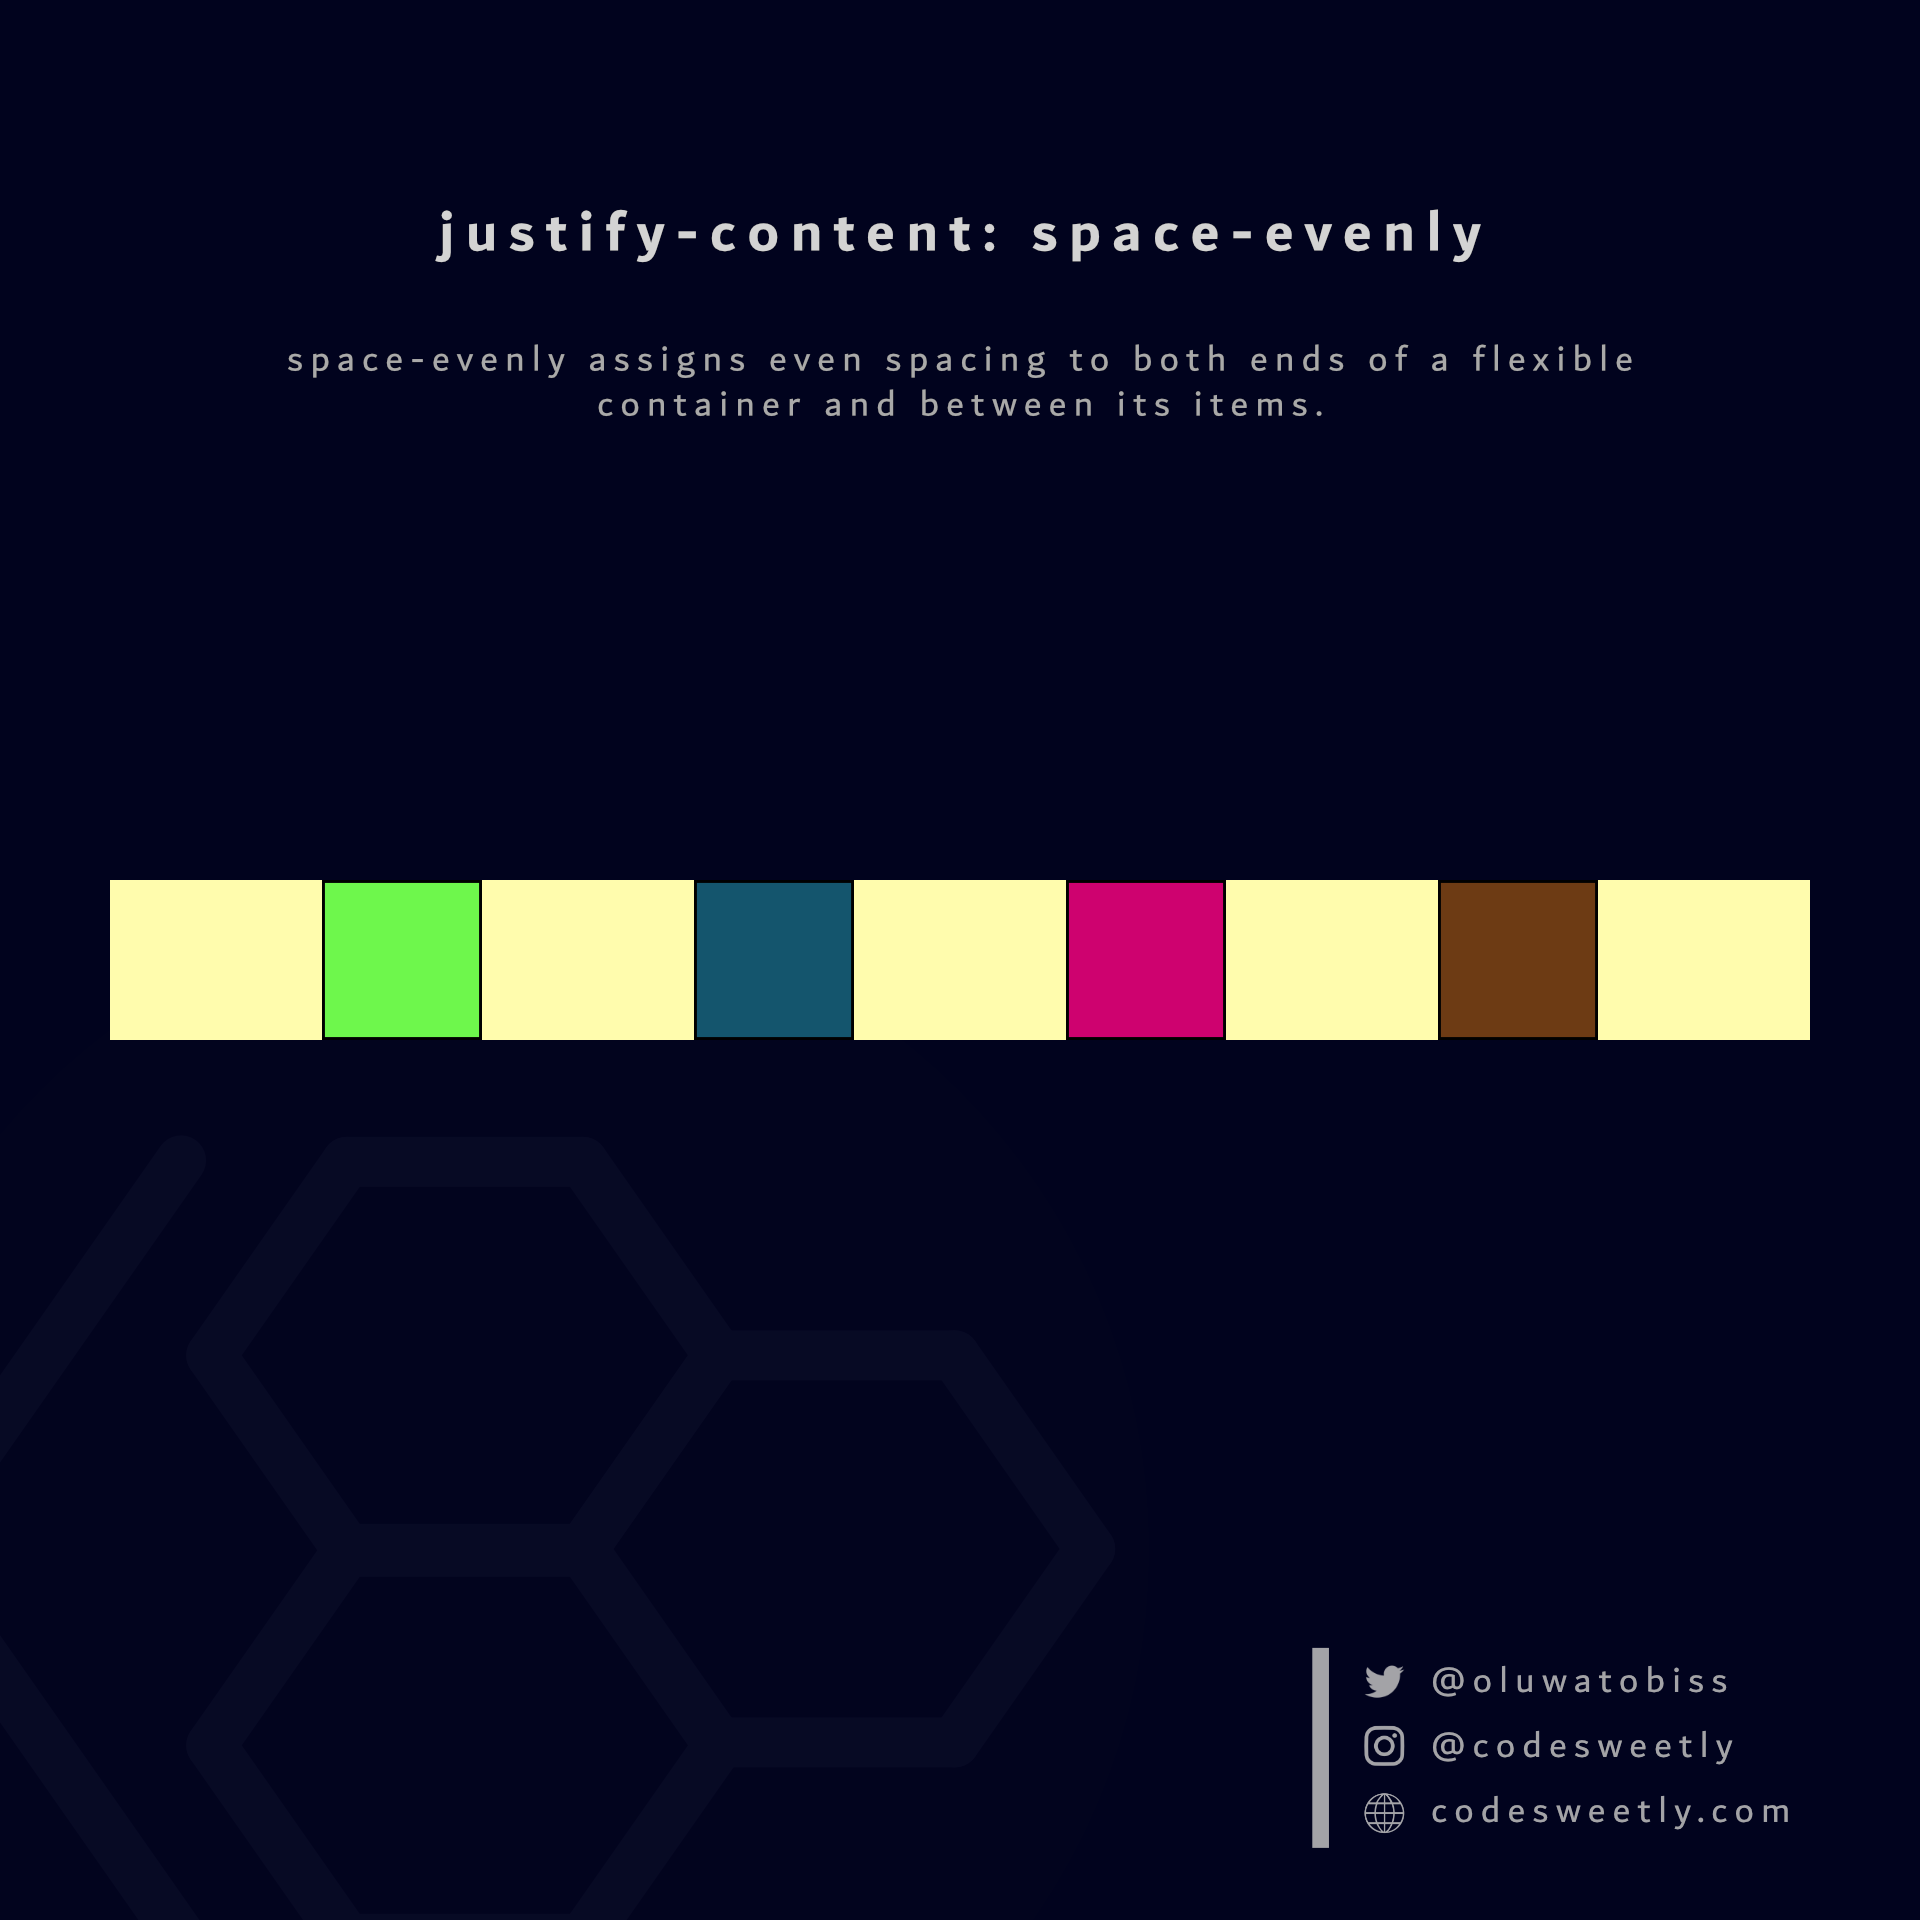 justify-content's space-evenly value ensures even spacing on both ends of the flexbox and between its items